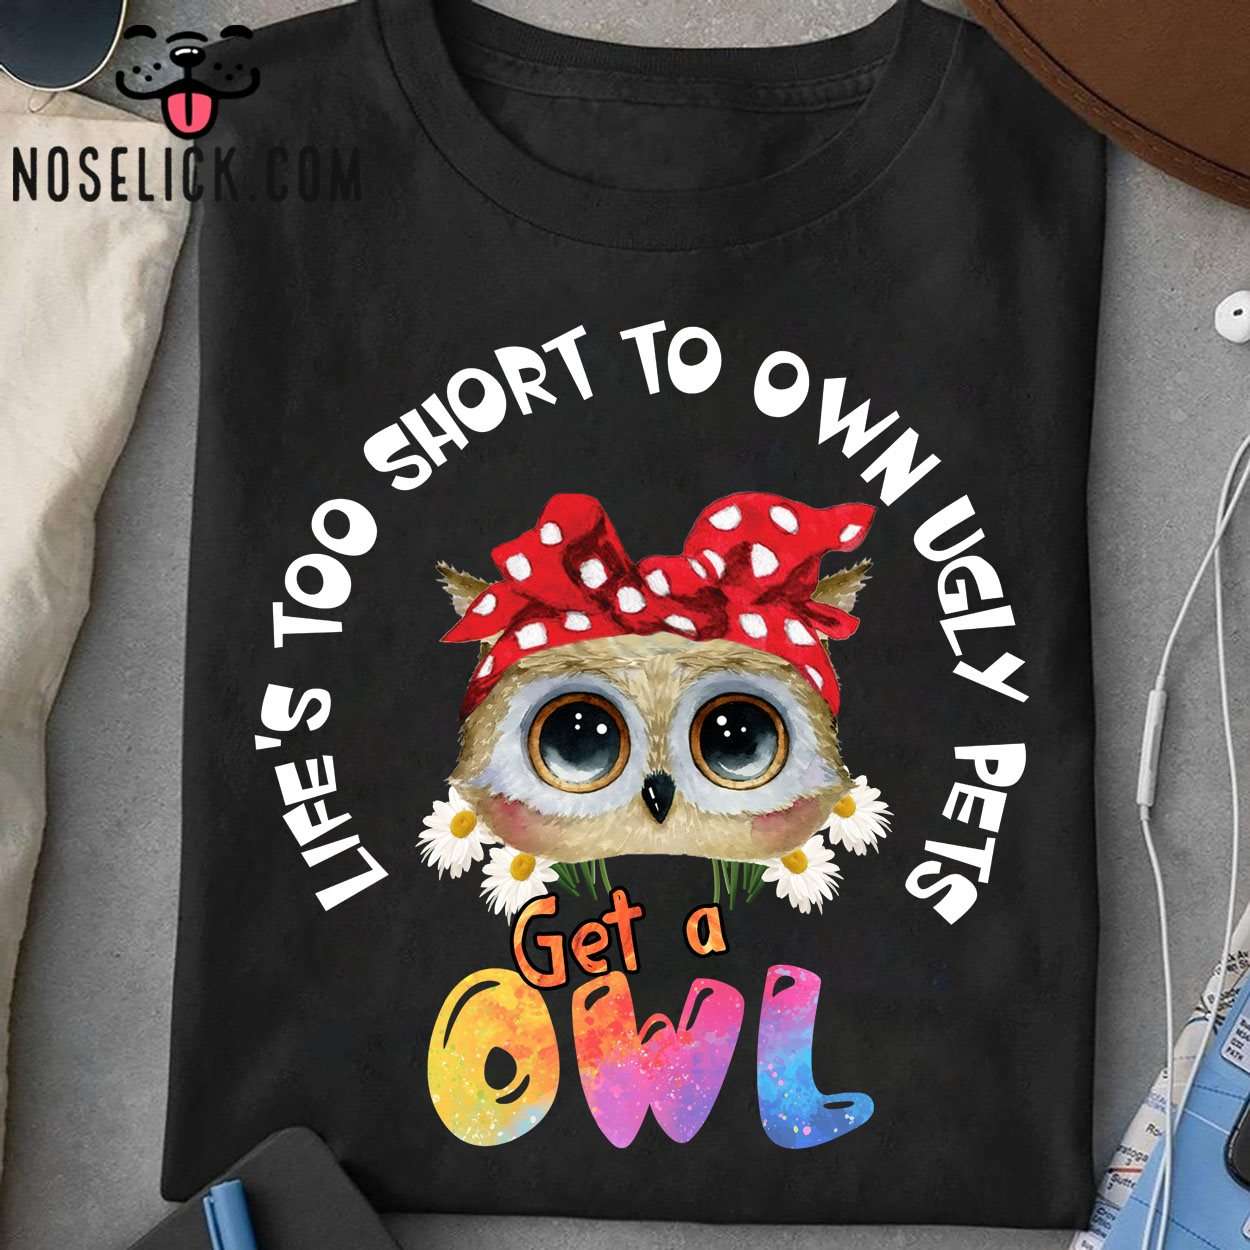 Life's too short to own ugly pets - Get an owl, ugly owl pet